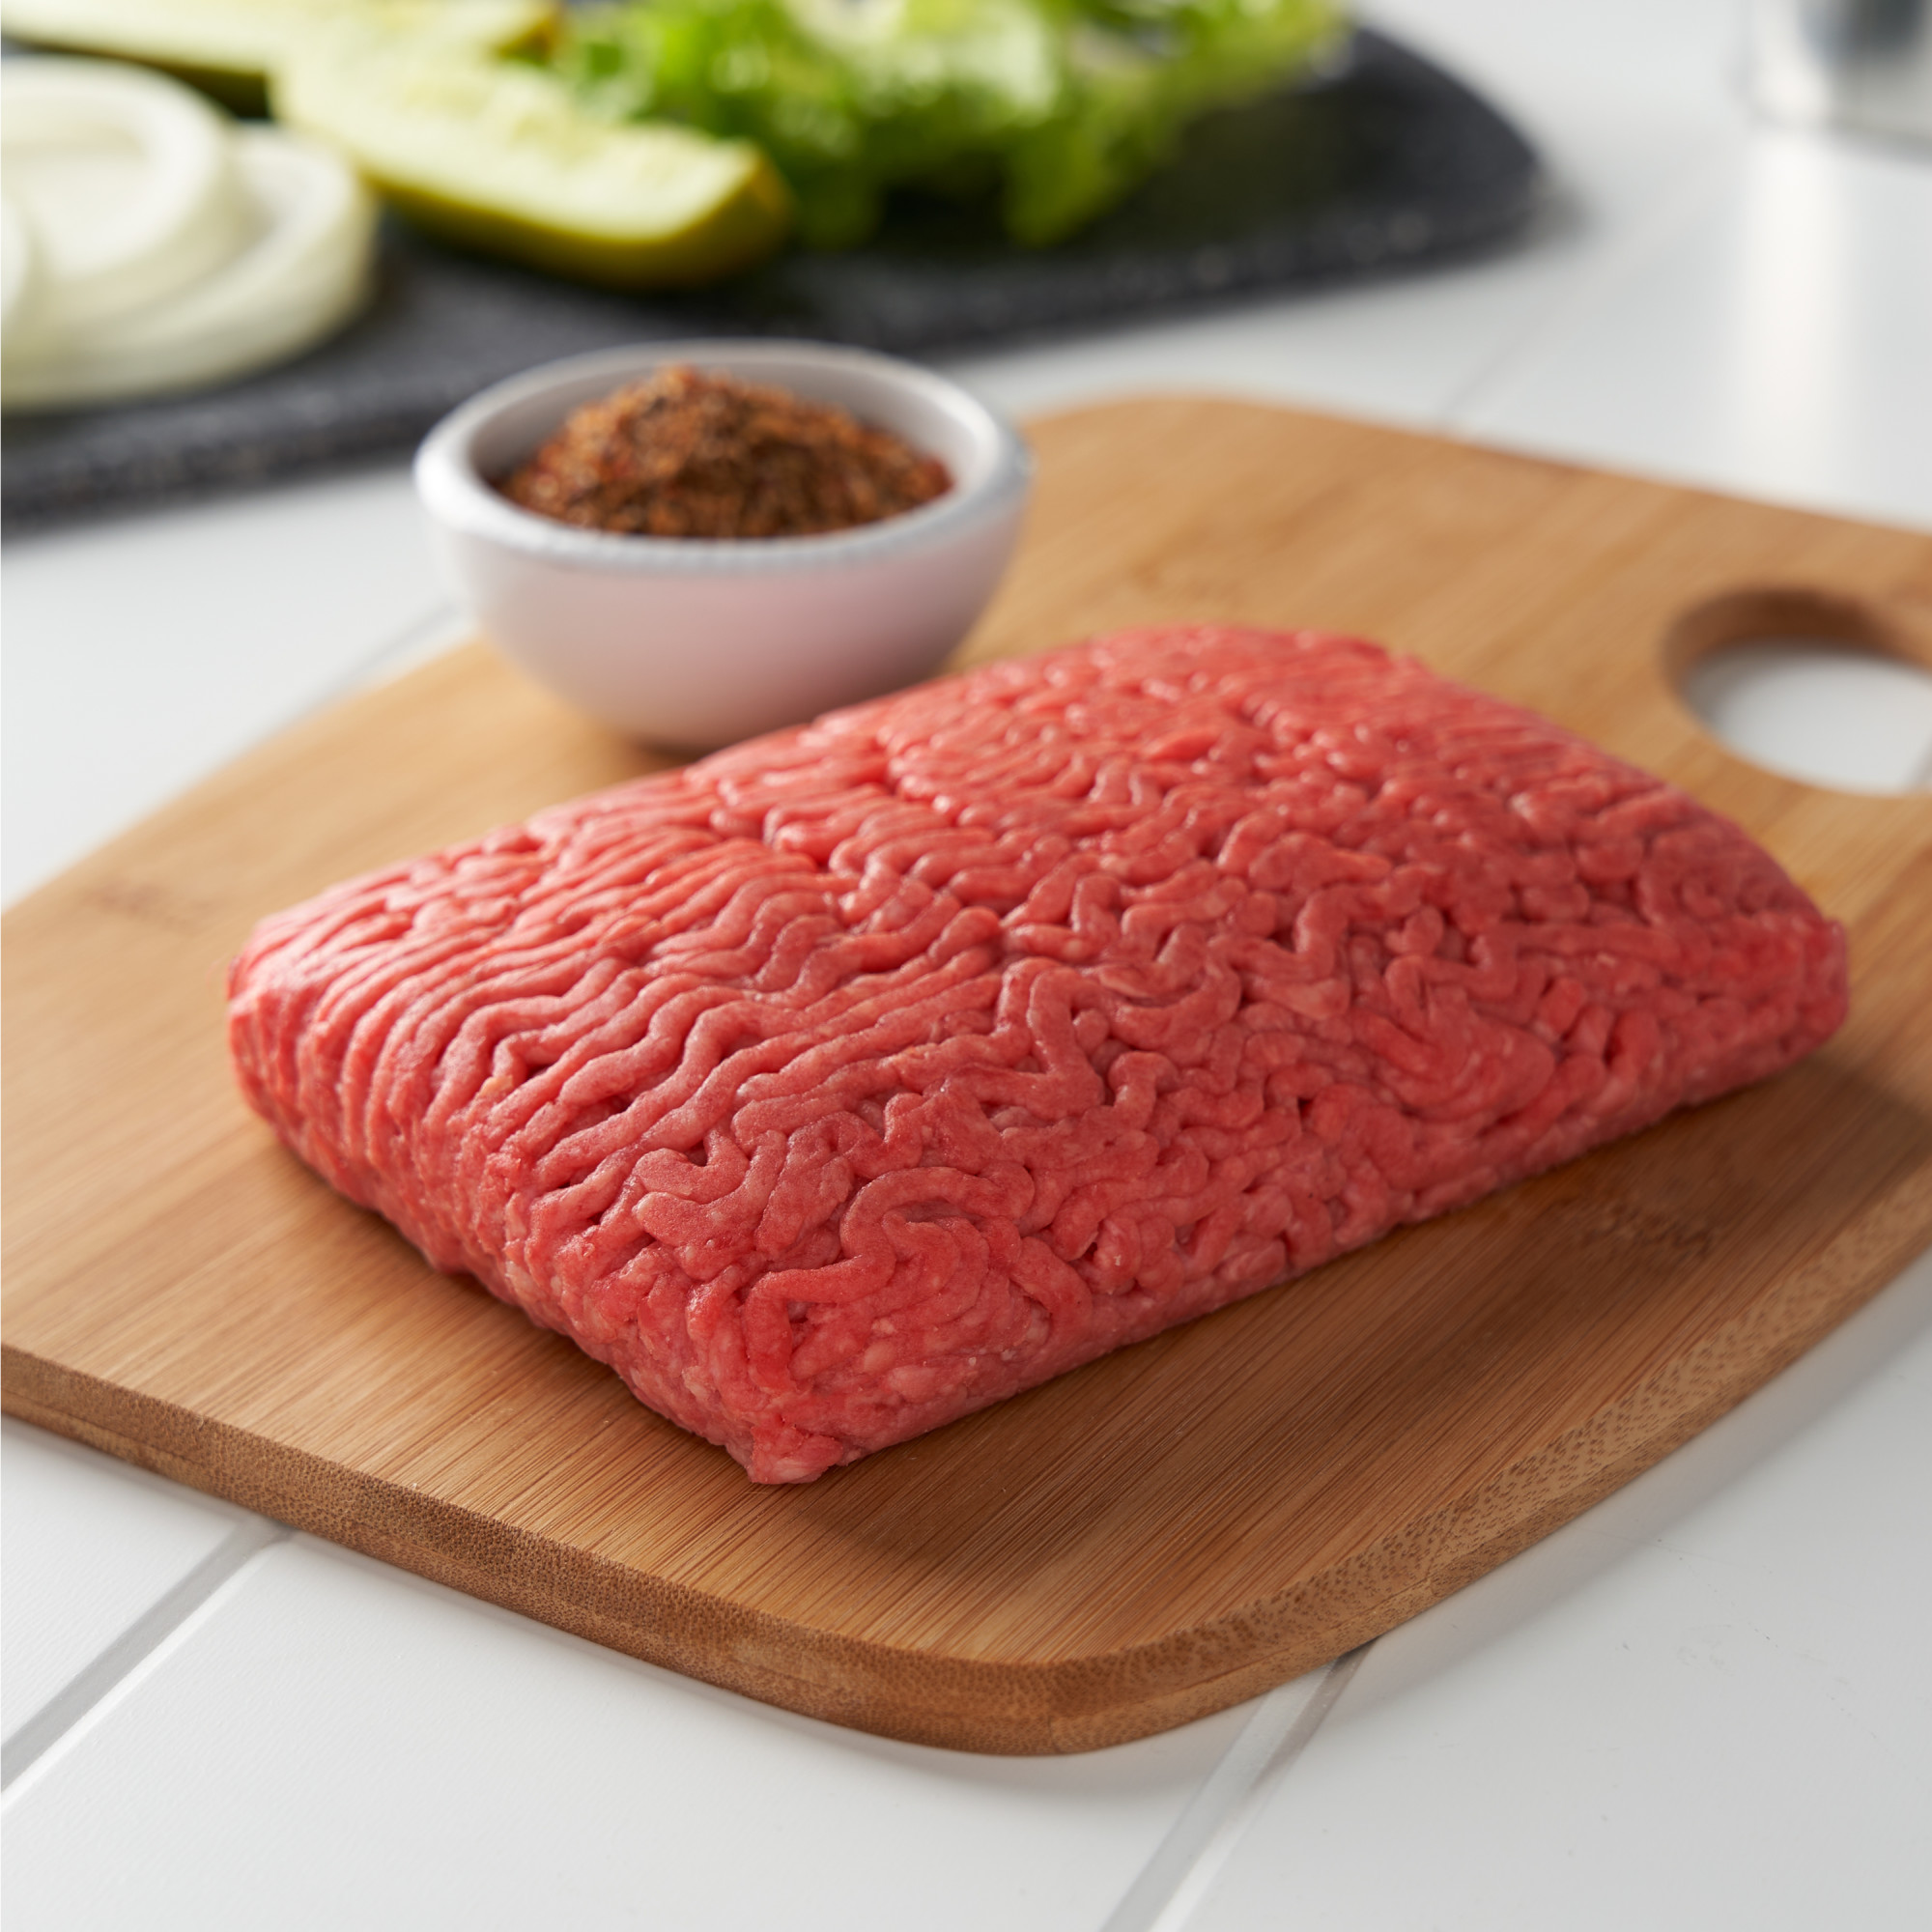 All Natural* 80% Lean/20% Fat Ground Beef Chuck, 1 lb Tray - image 3 of 8